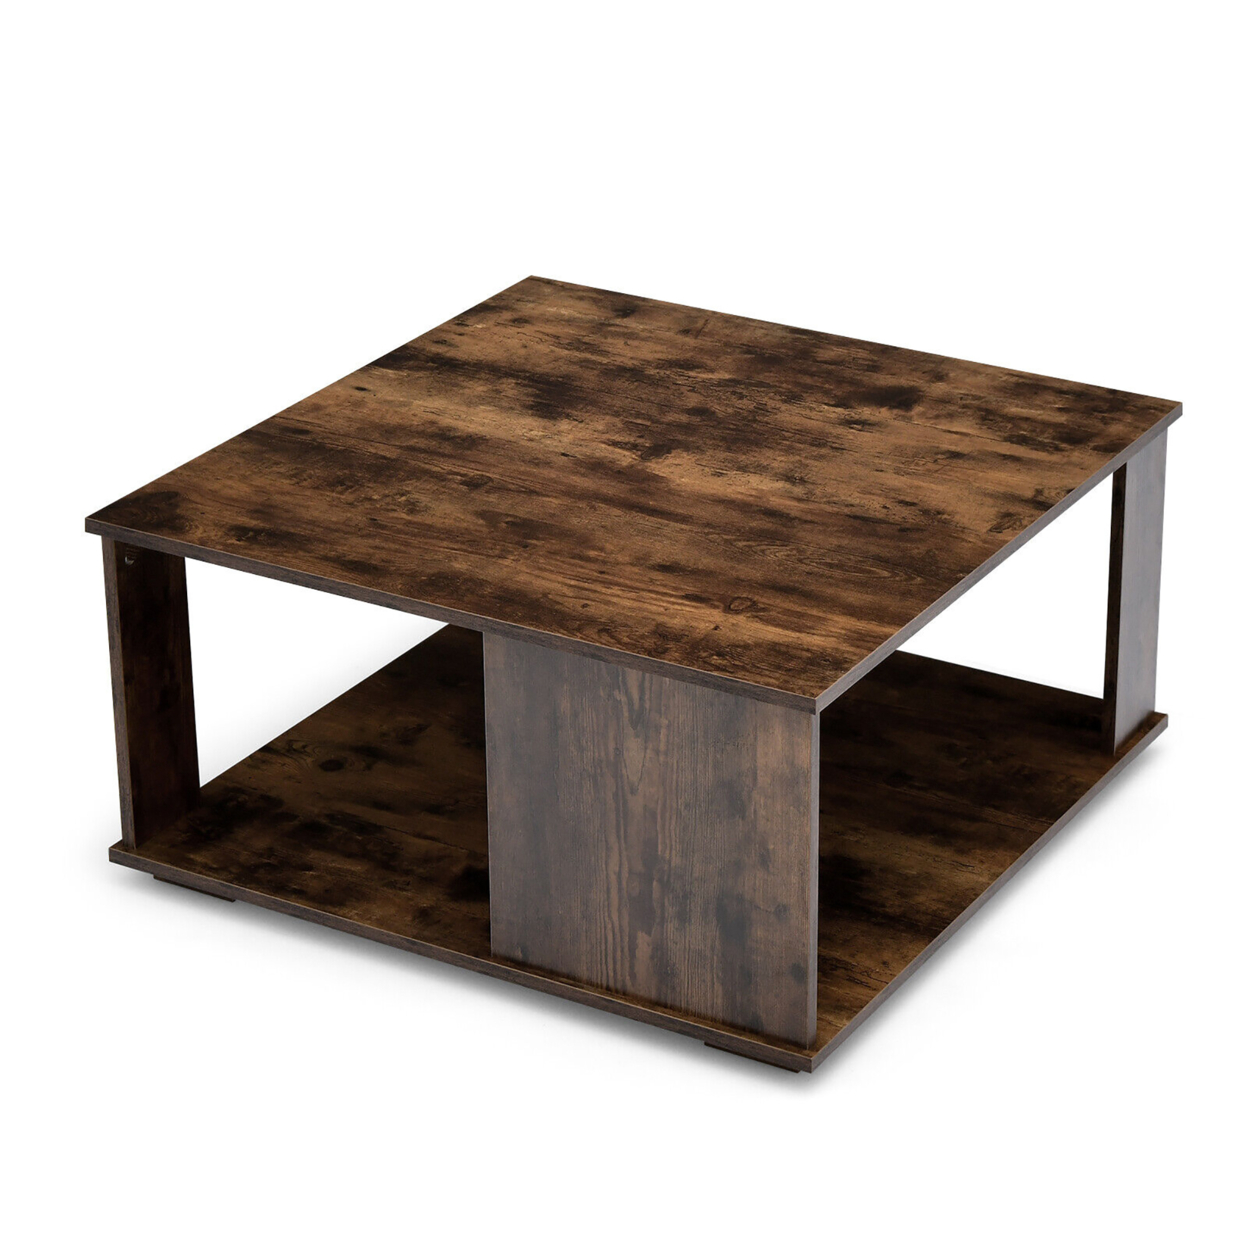 2-Tier Square Coffee Table W/ Storage Industrial Center Table For Living Room